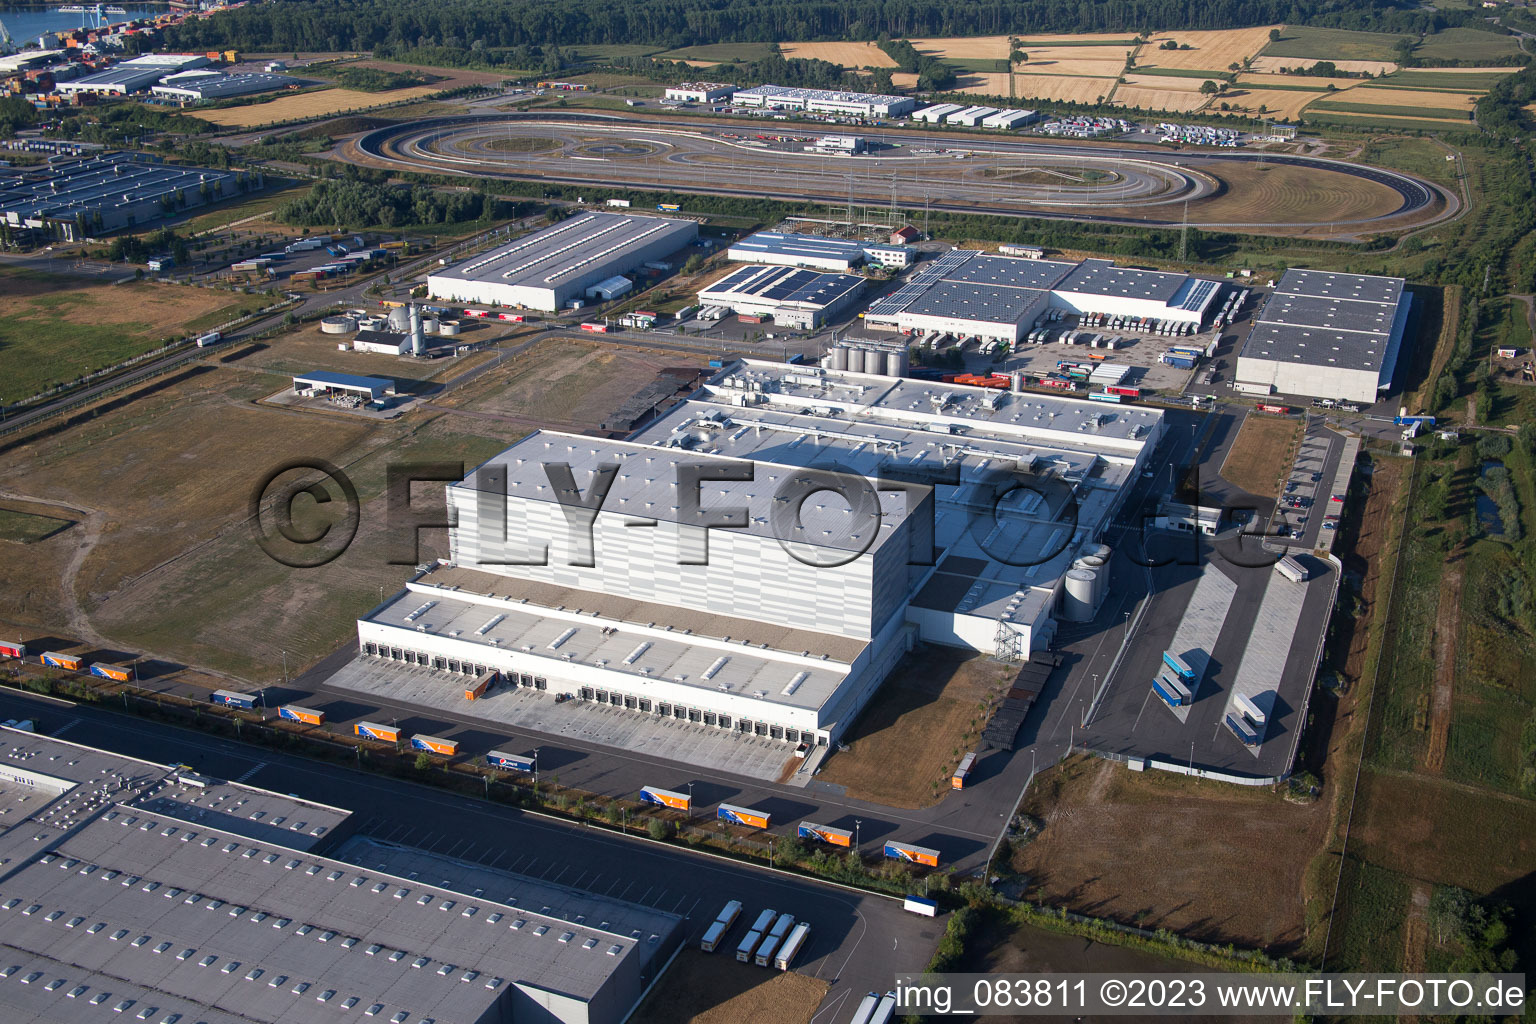 Oberwald industrial area in Wörth am Rhein in the state Rhineland-Palatinate, Germany viewn from the air